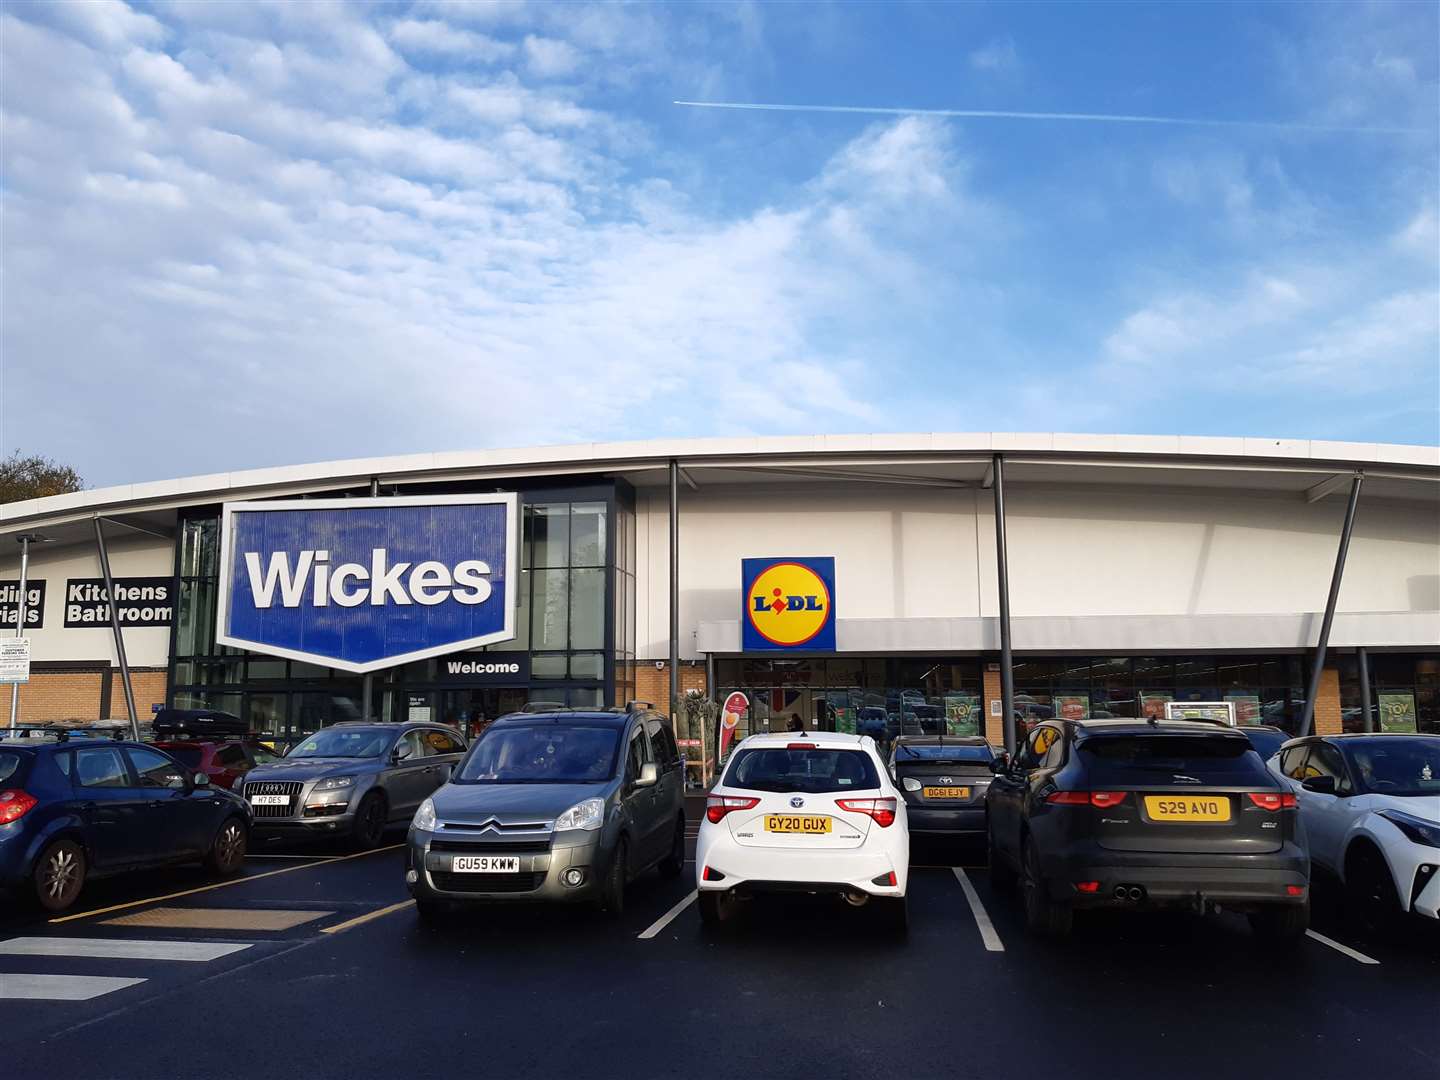 Warner took items from the Wickes store in Maidstone